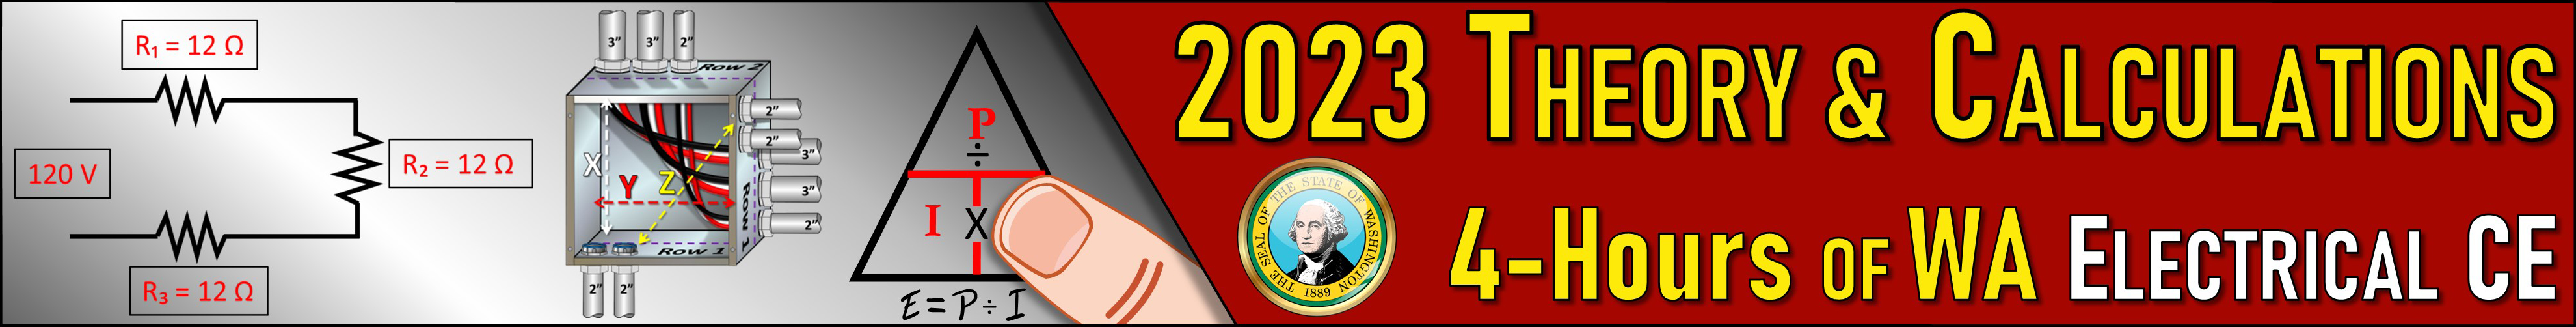 2023 Theory and Calculations Banner